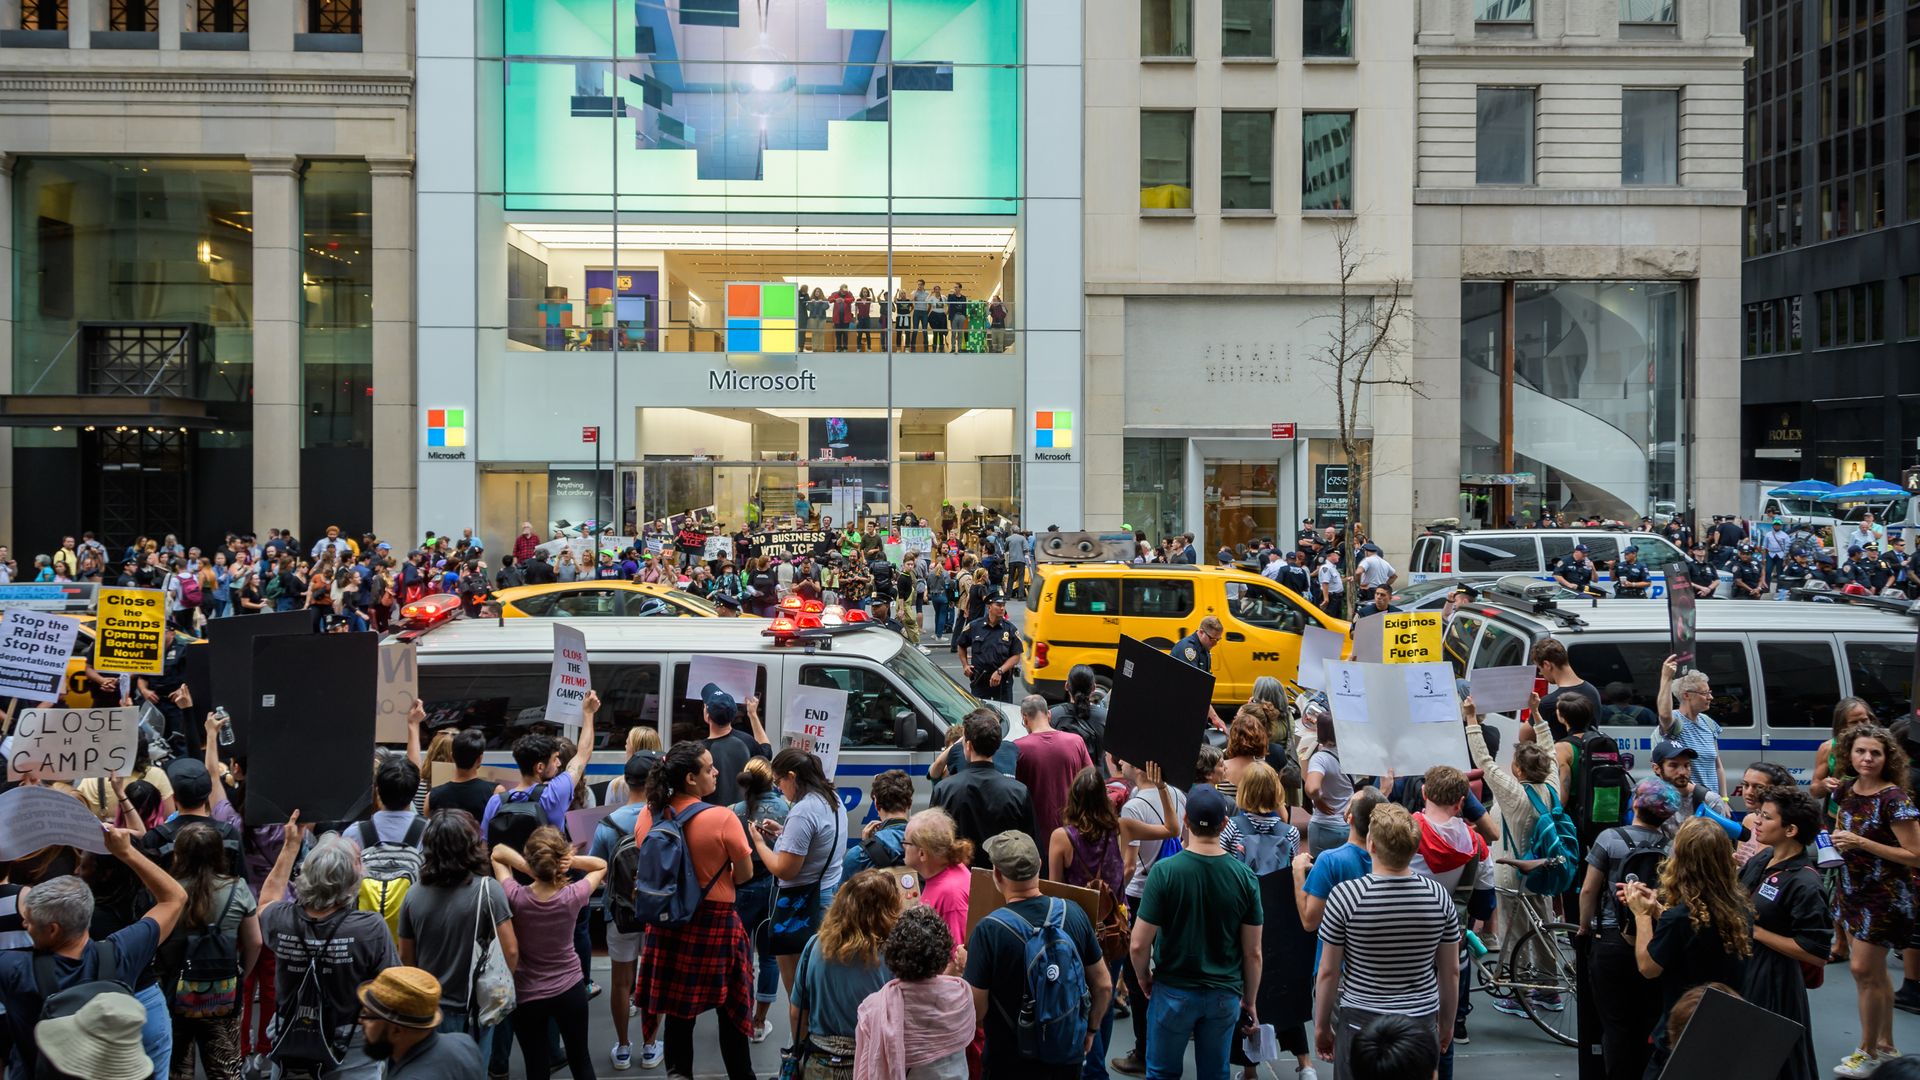 A total of 76 protesters were arrested after shutting down the Microsoft retail store in Manhattan and blocking traffic on Fifth Avenue on September 14